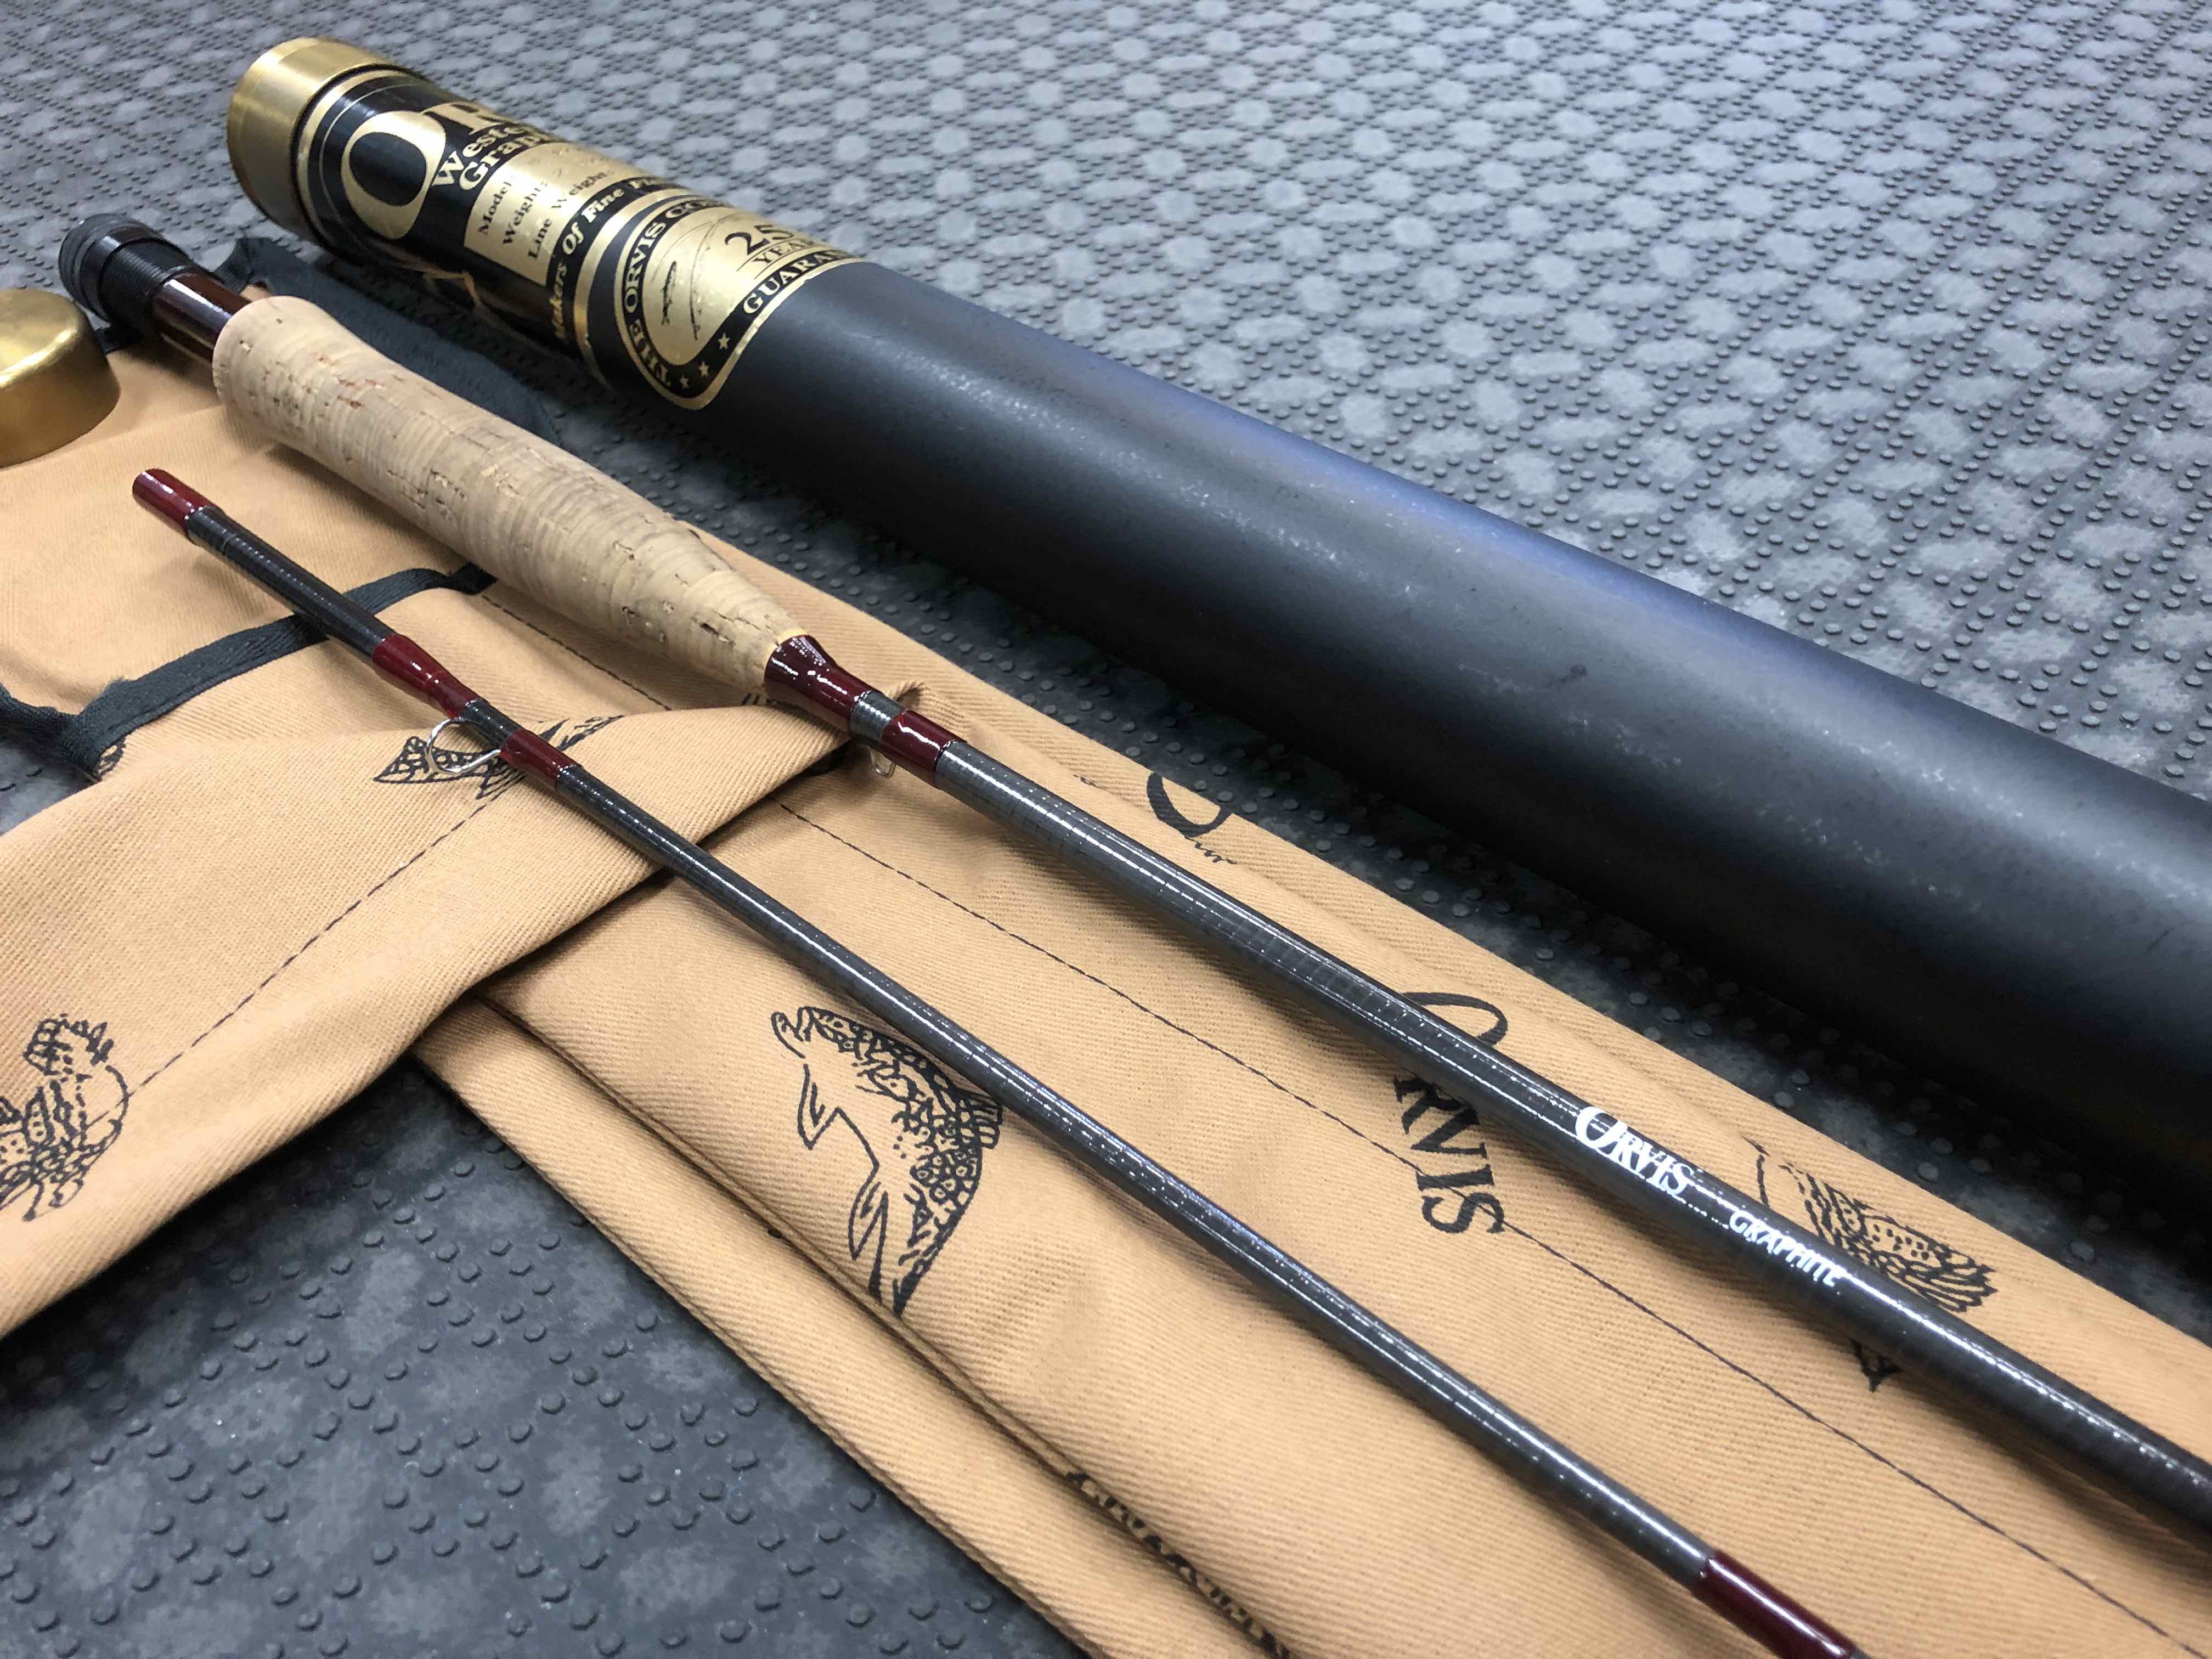 https://thefirstcast.ca/wp-content/uploads/2019/04/Orvis-Western-Series-Two-Piece-8-12-foot-2-weight-Fly-Rod-AA.jpg